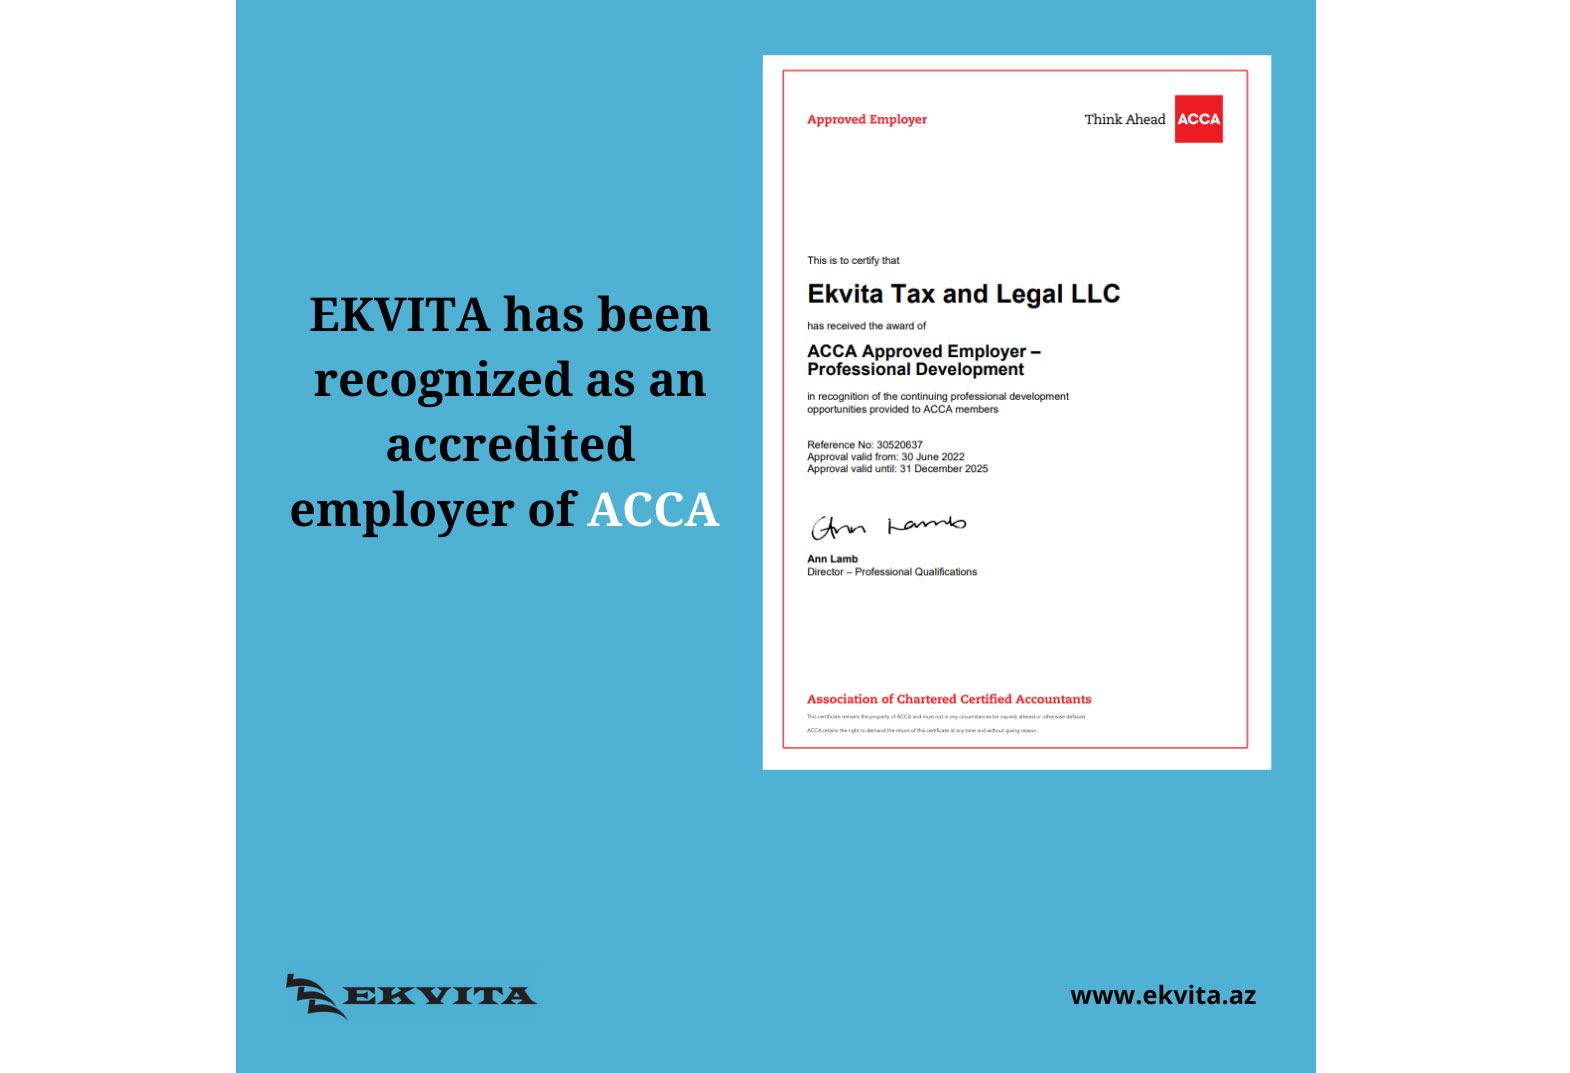 EKVITA is now recognized as Accredited Employer of ACCA